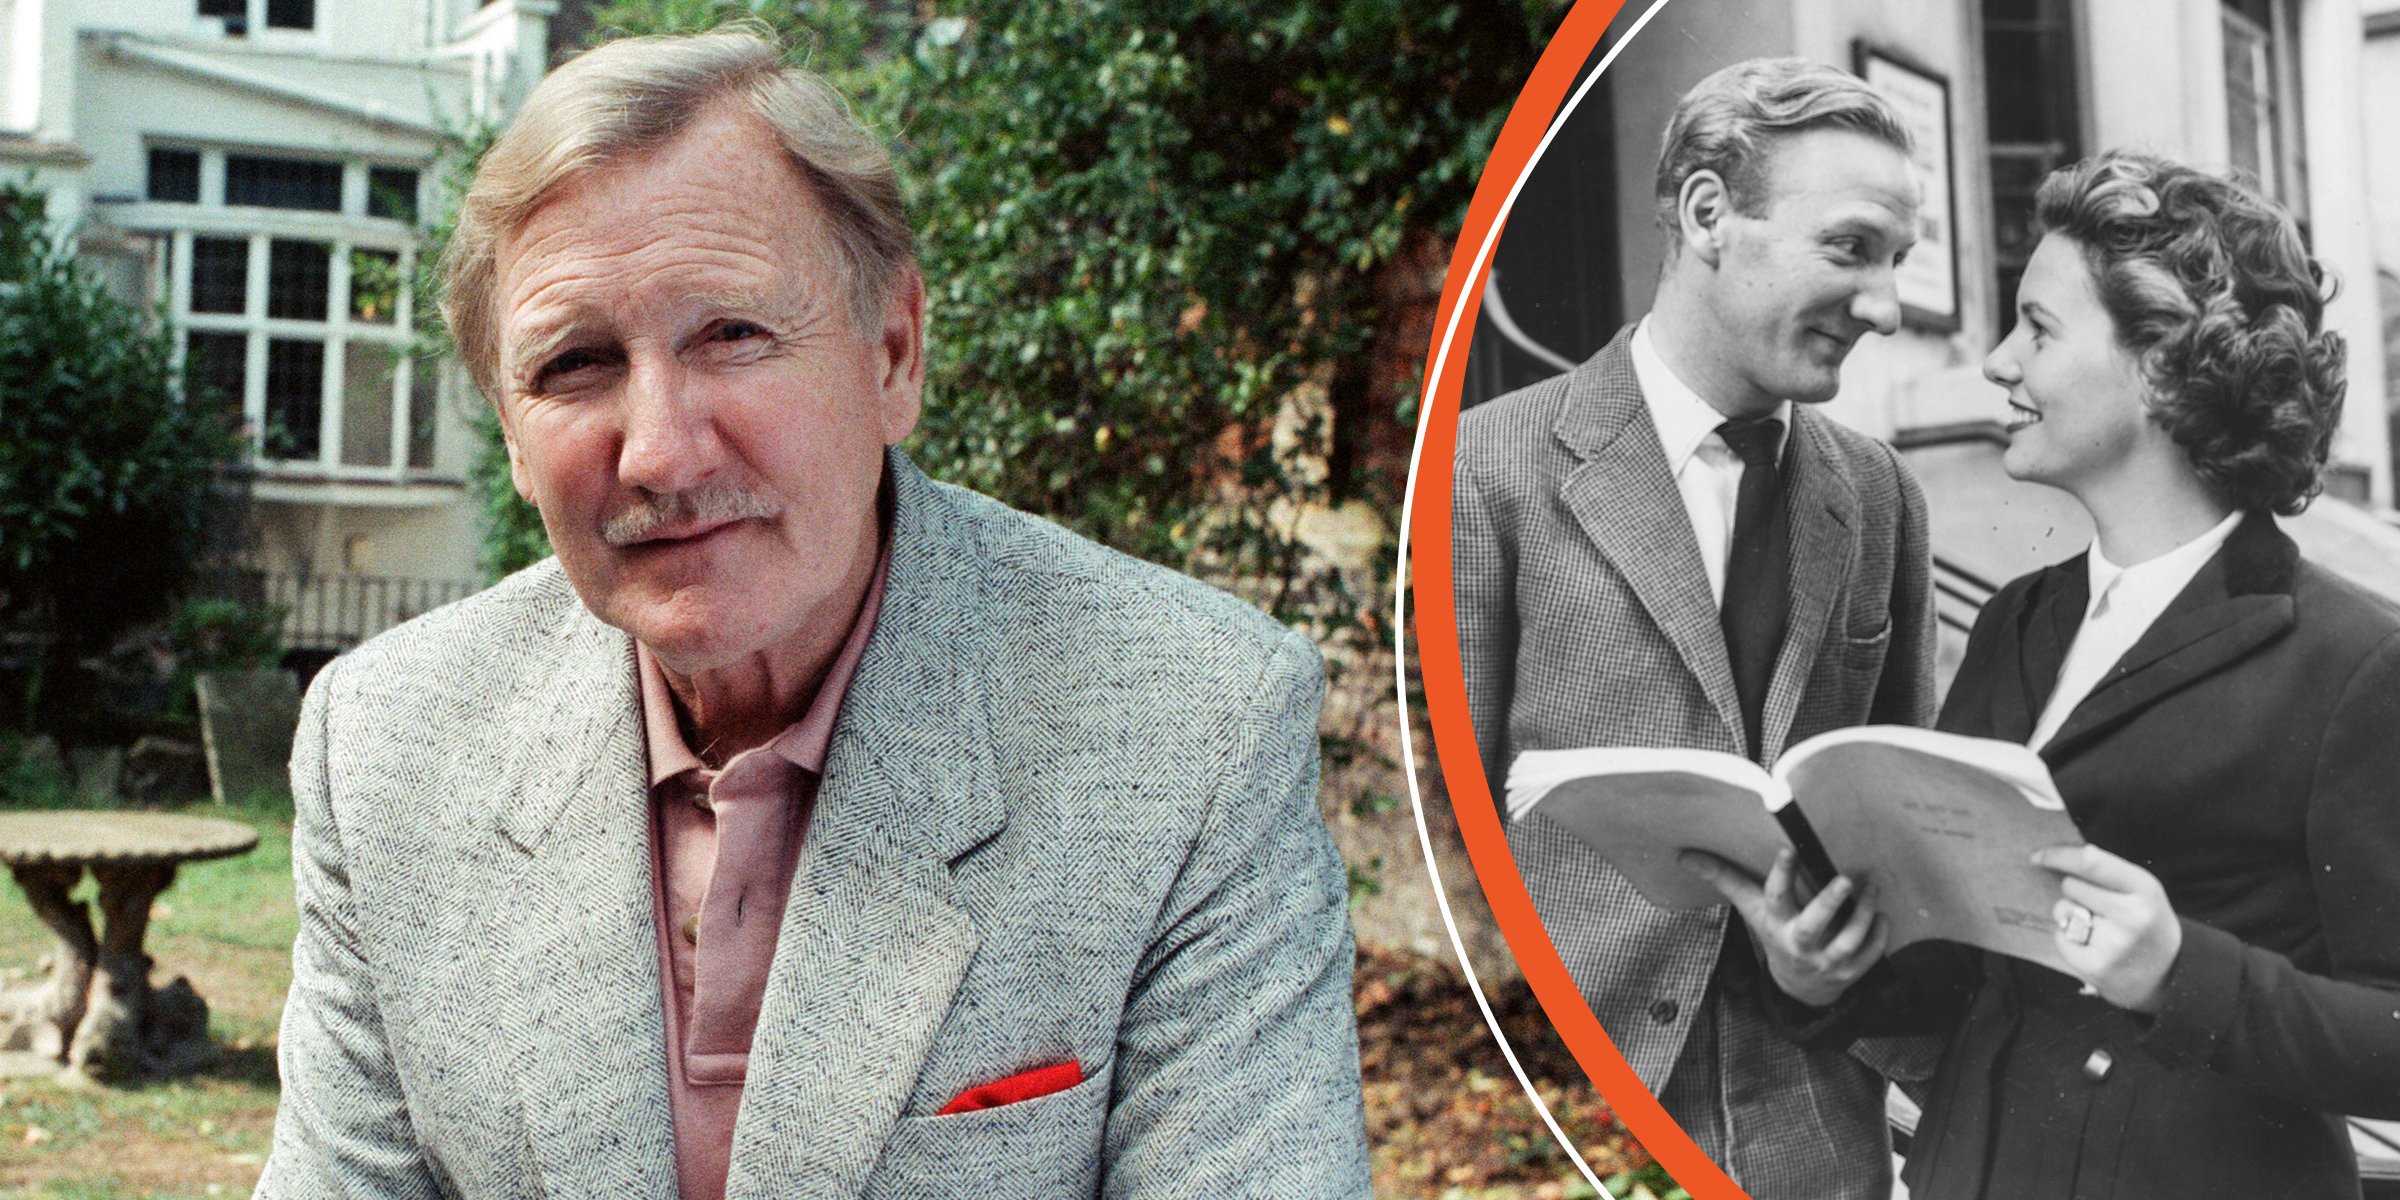 Leslie Phillips, 1989 | Leslie Phillips and Patricia Cutts, 1954 | Source: Getty Images